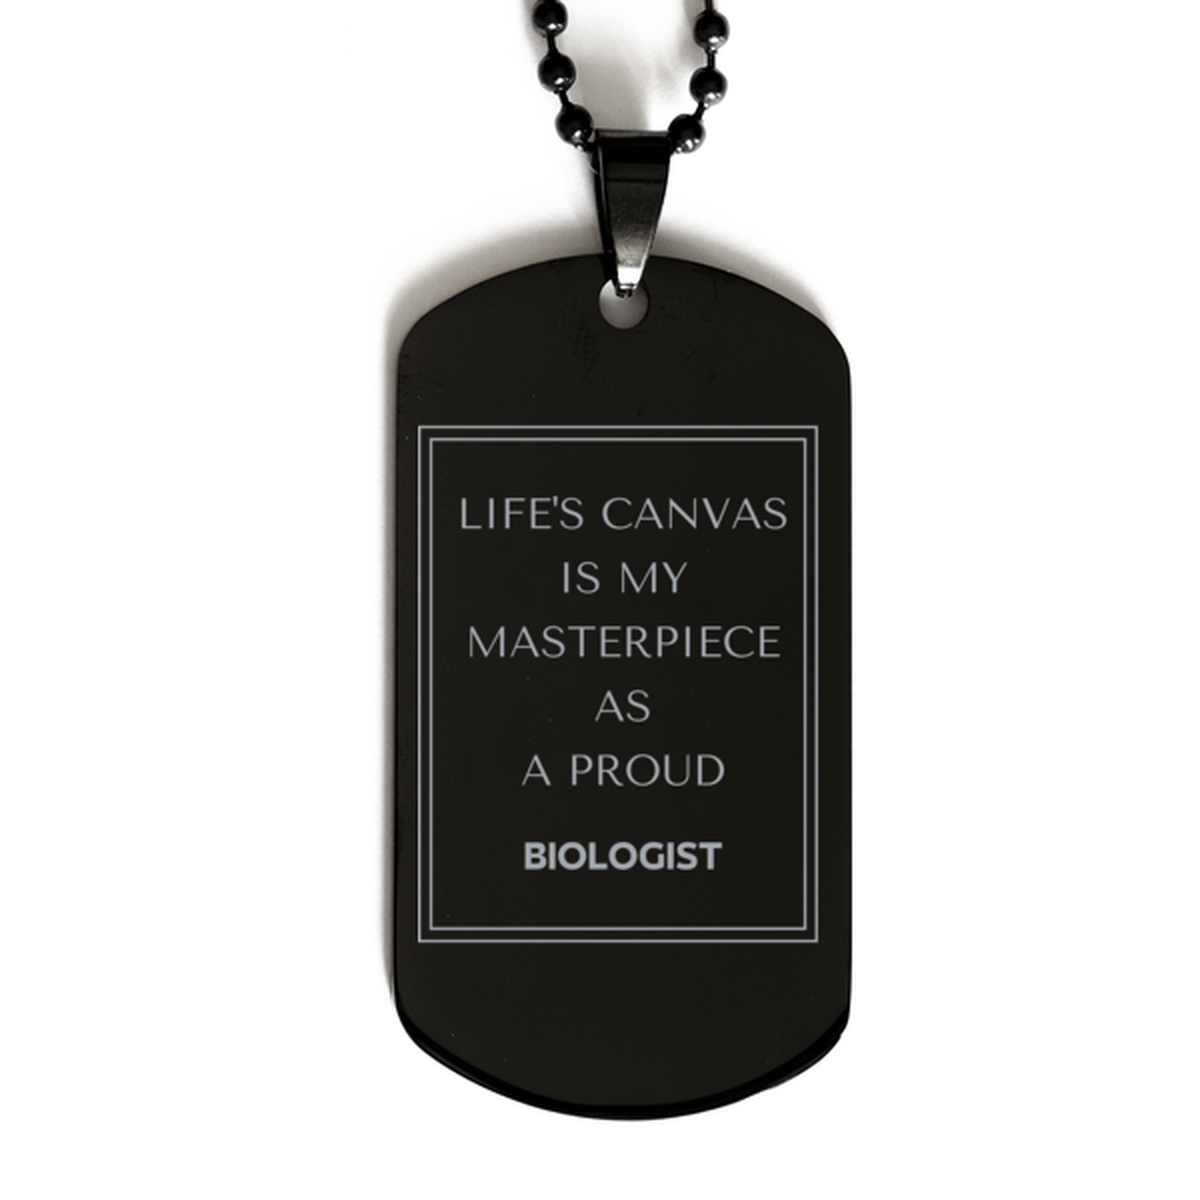 Proud Biologist Gifts, Life's canvas is my masterpiece, Epic Birthday Christmas Unique Black Dog Tag For Biologist, Coworkers, Men, Women, Friends